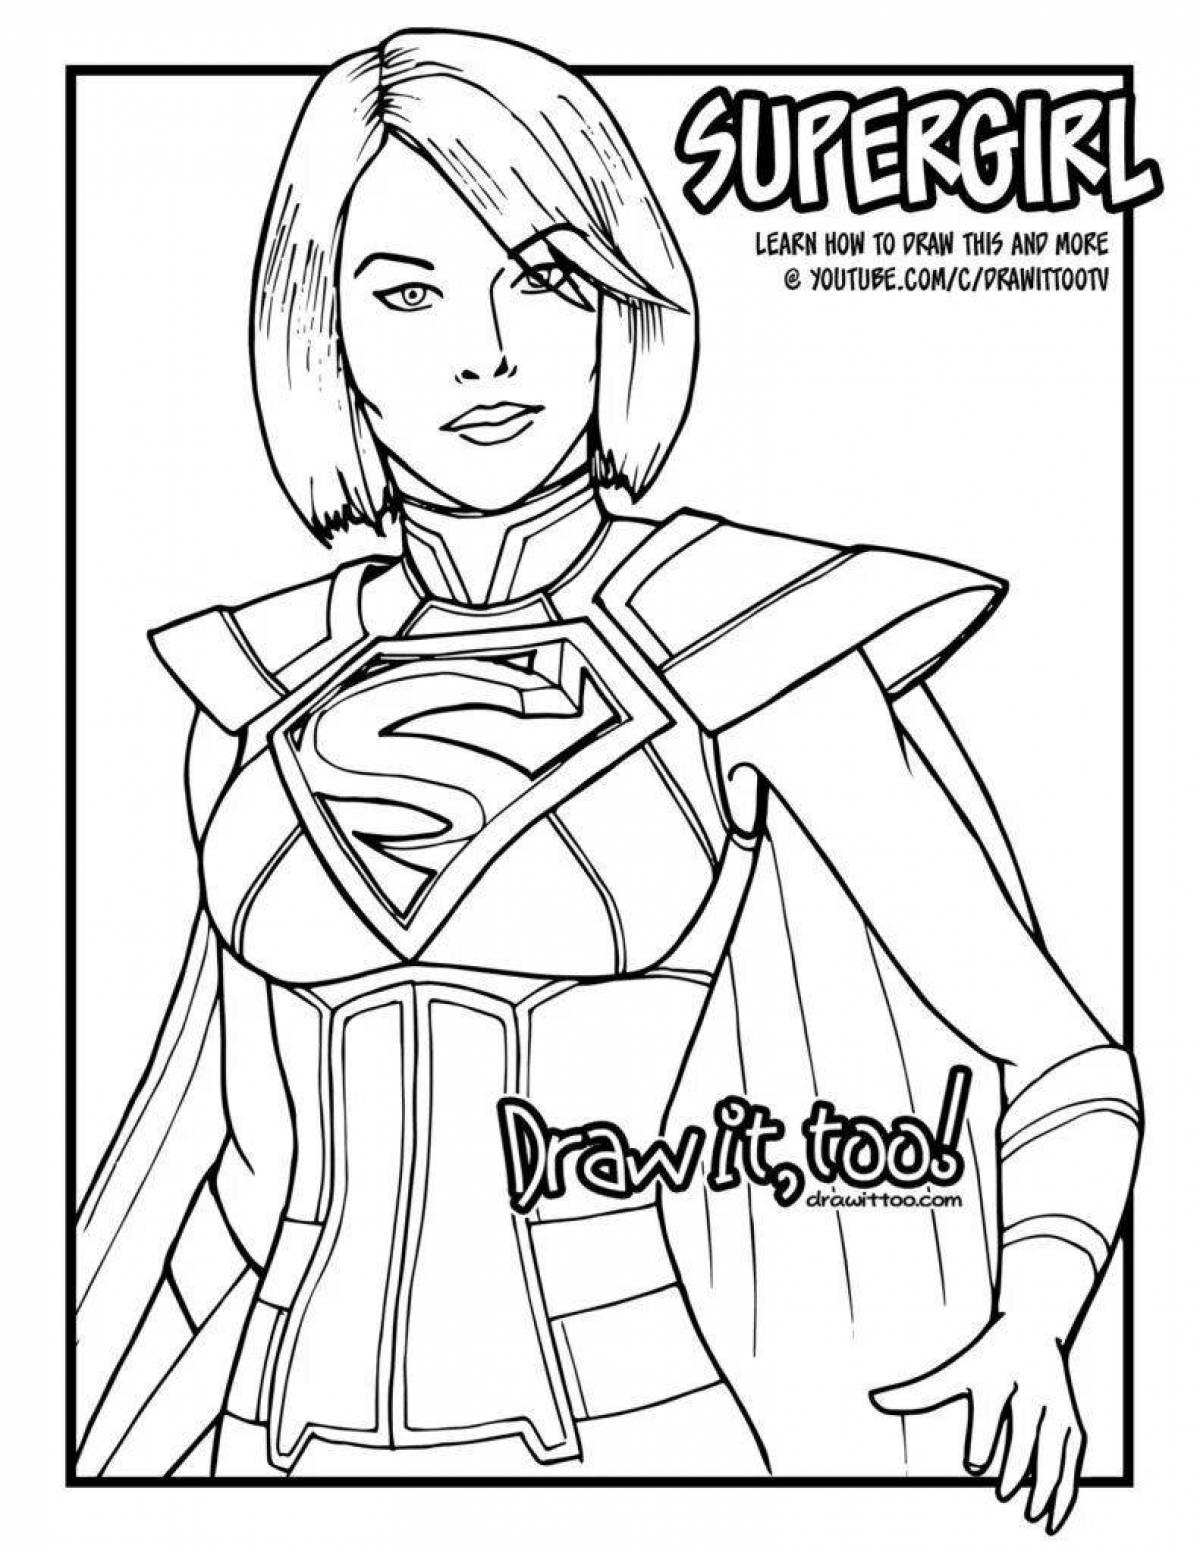 Injustice 2 deluxe coloring book